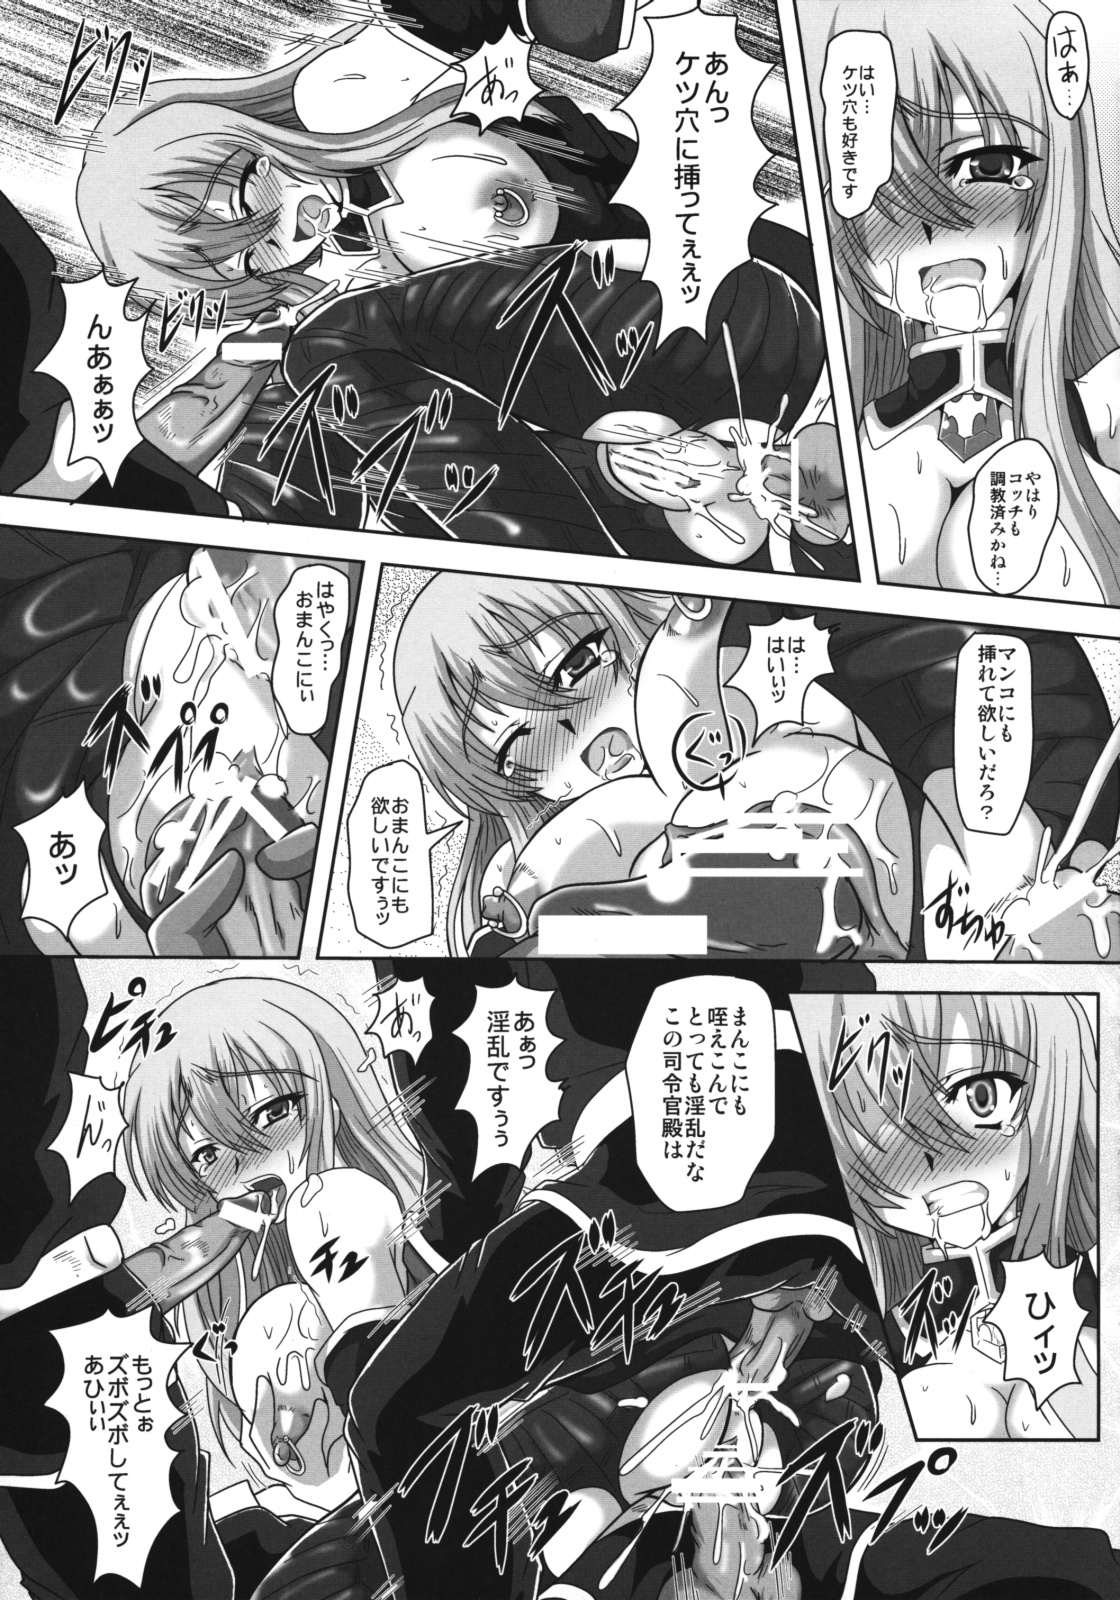 [Samurai (Hige)] One Night Stand (Valkyria Chronicles) page 8 full